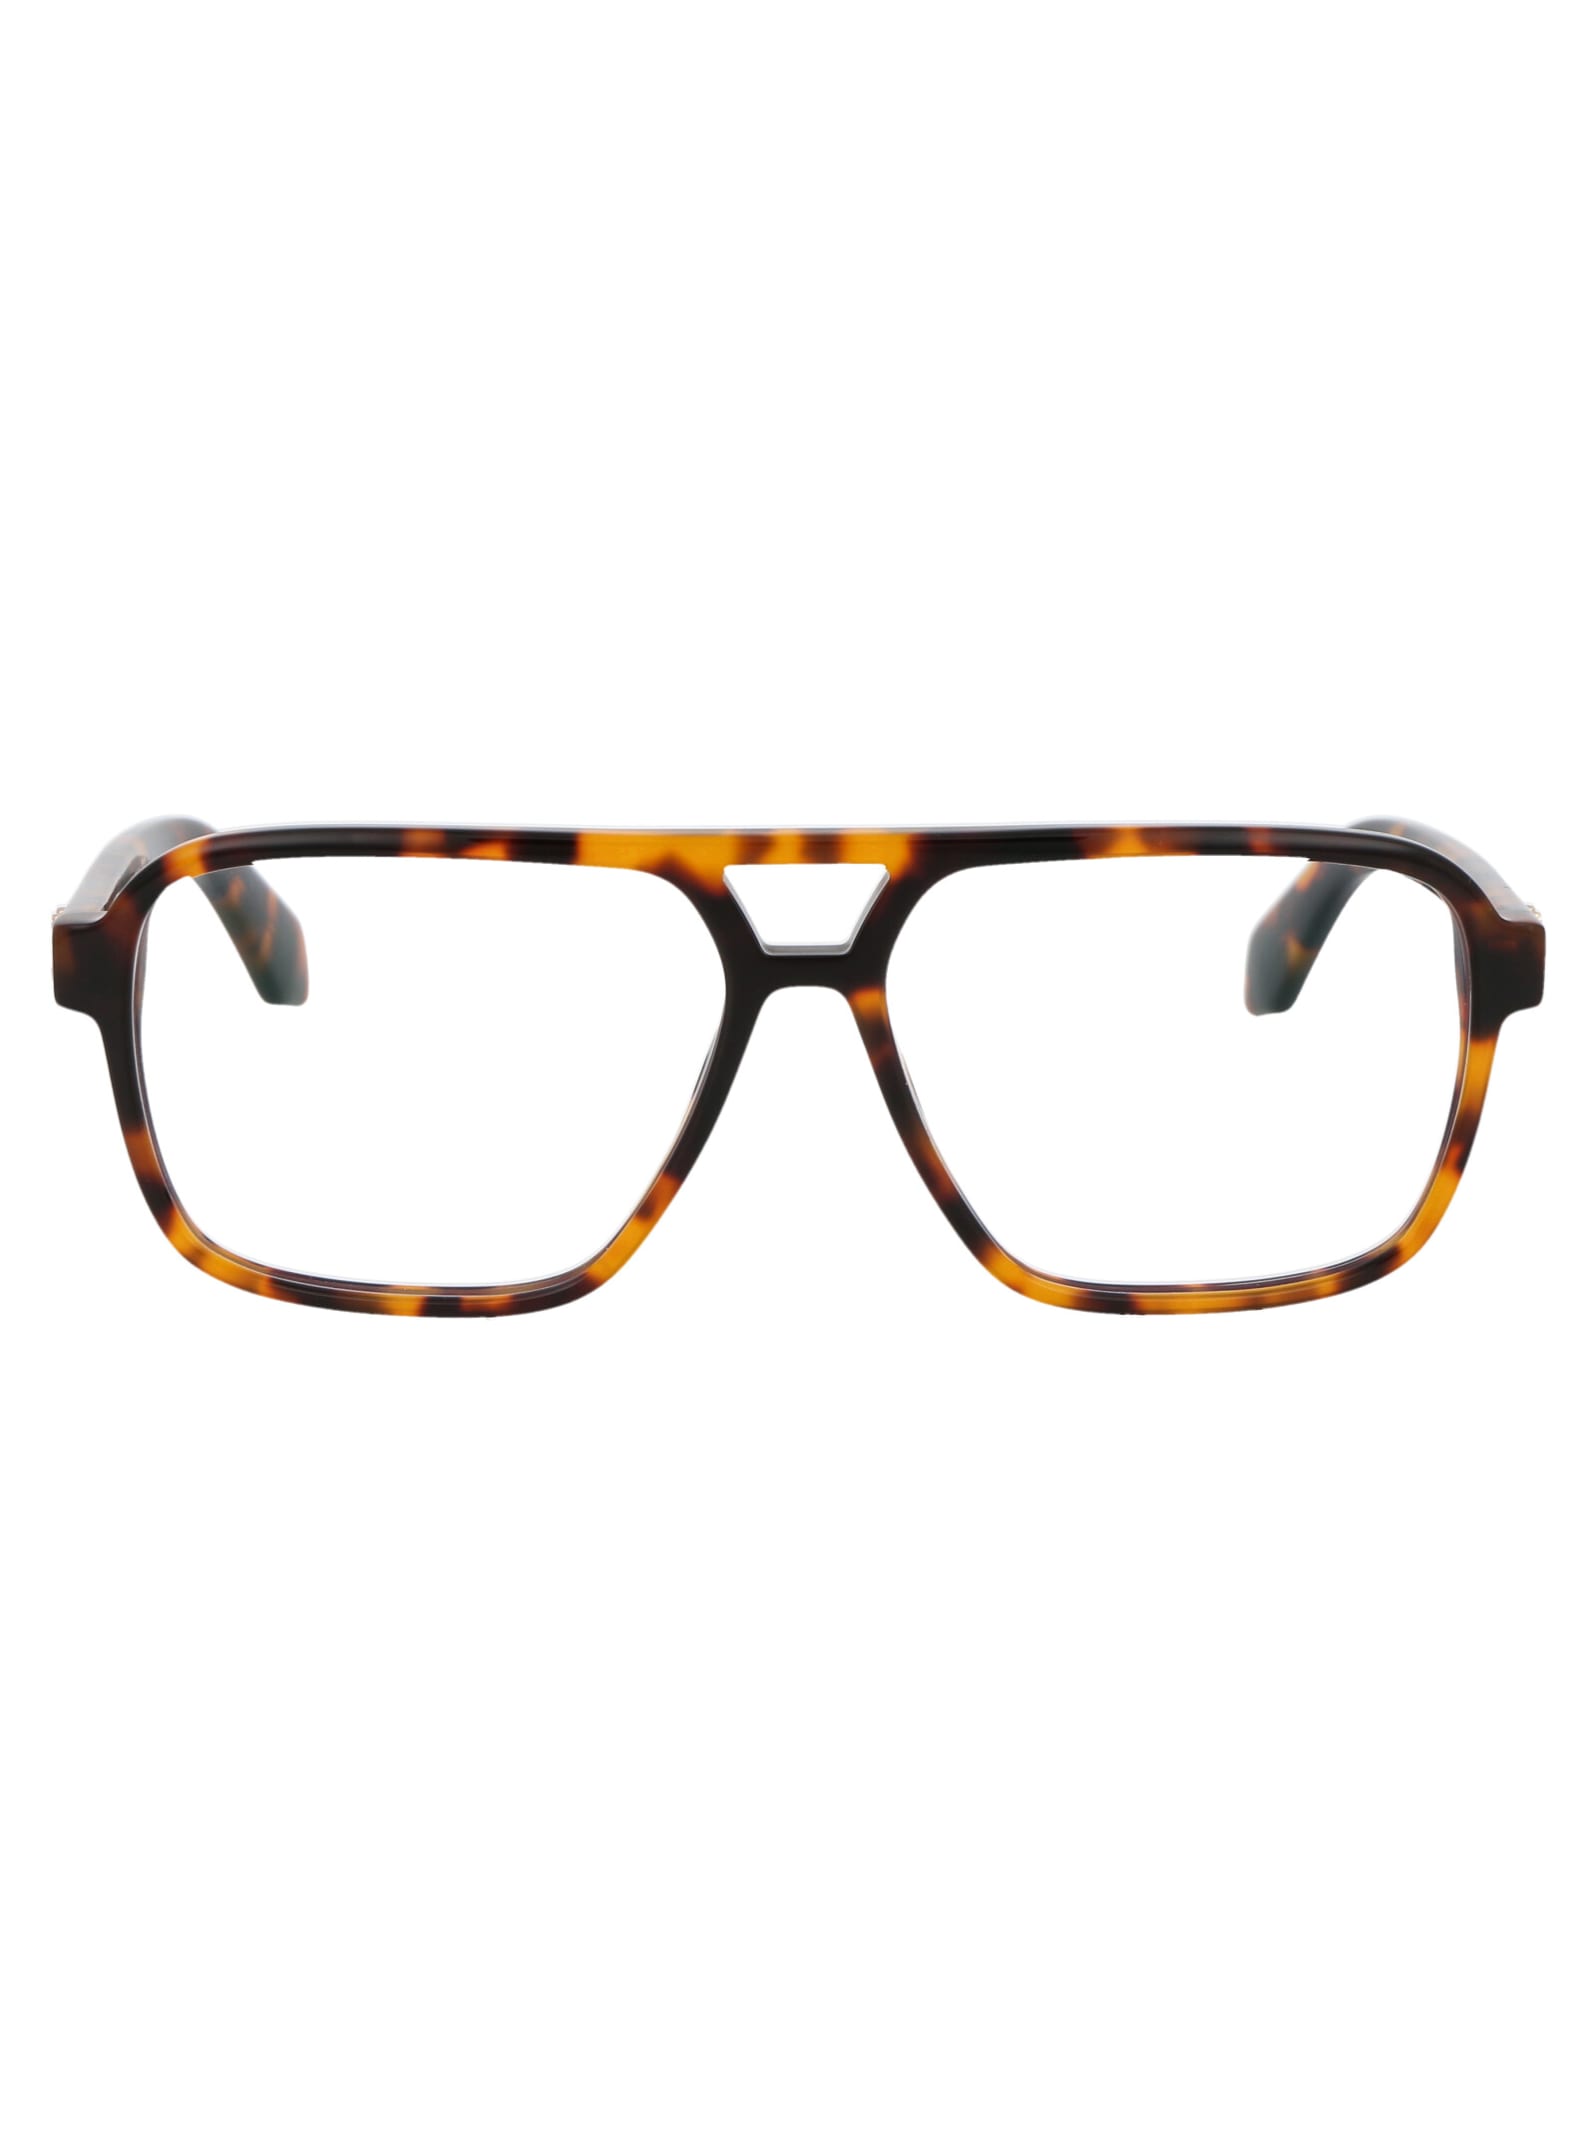 Off-White Optical Style 28 Glasses